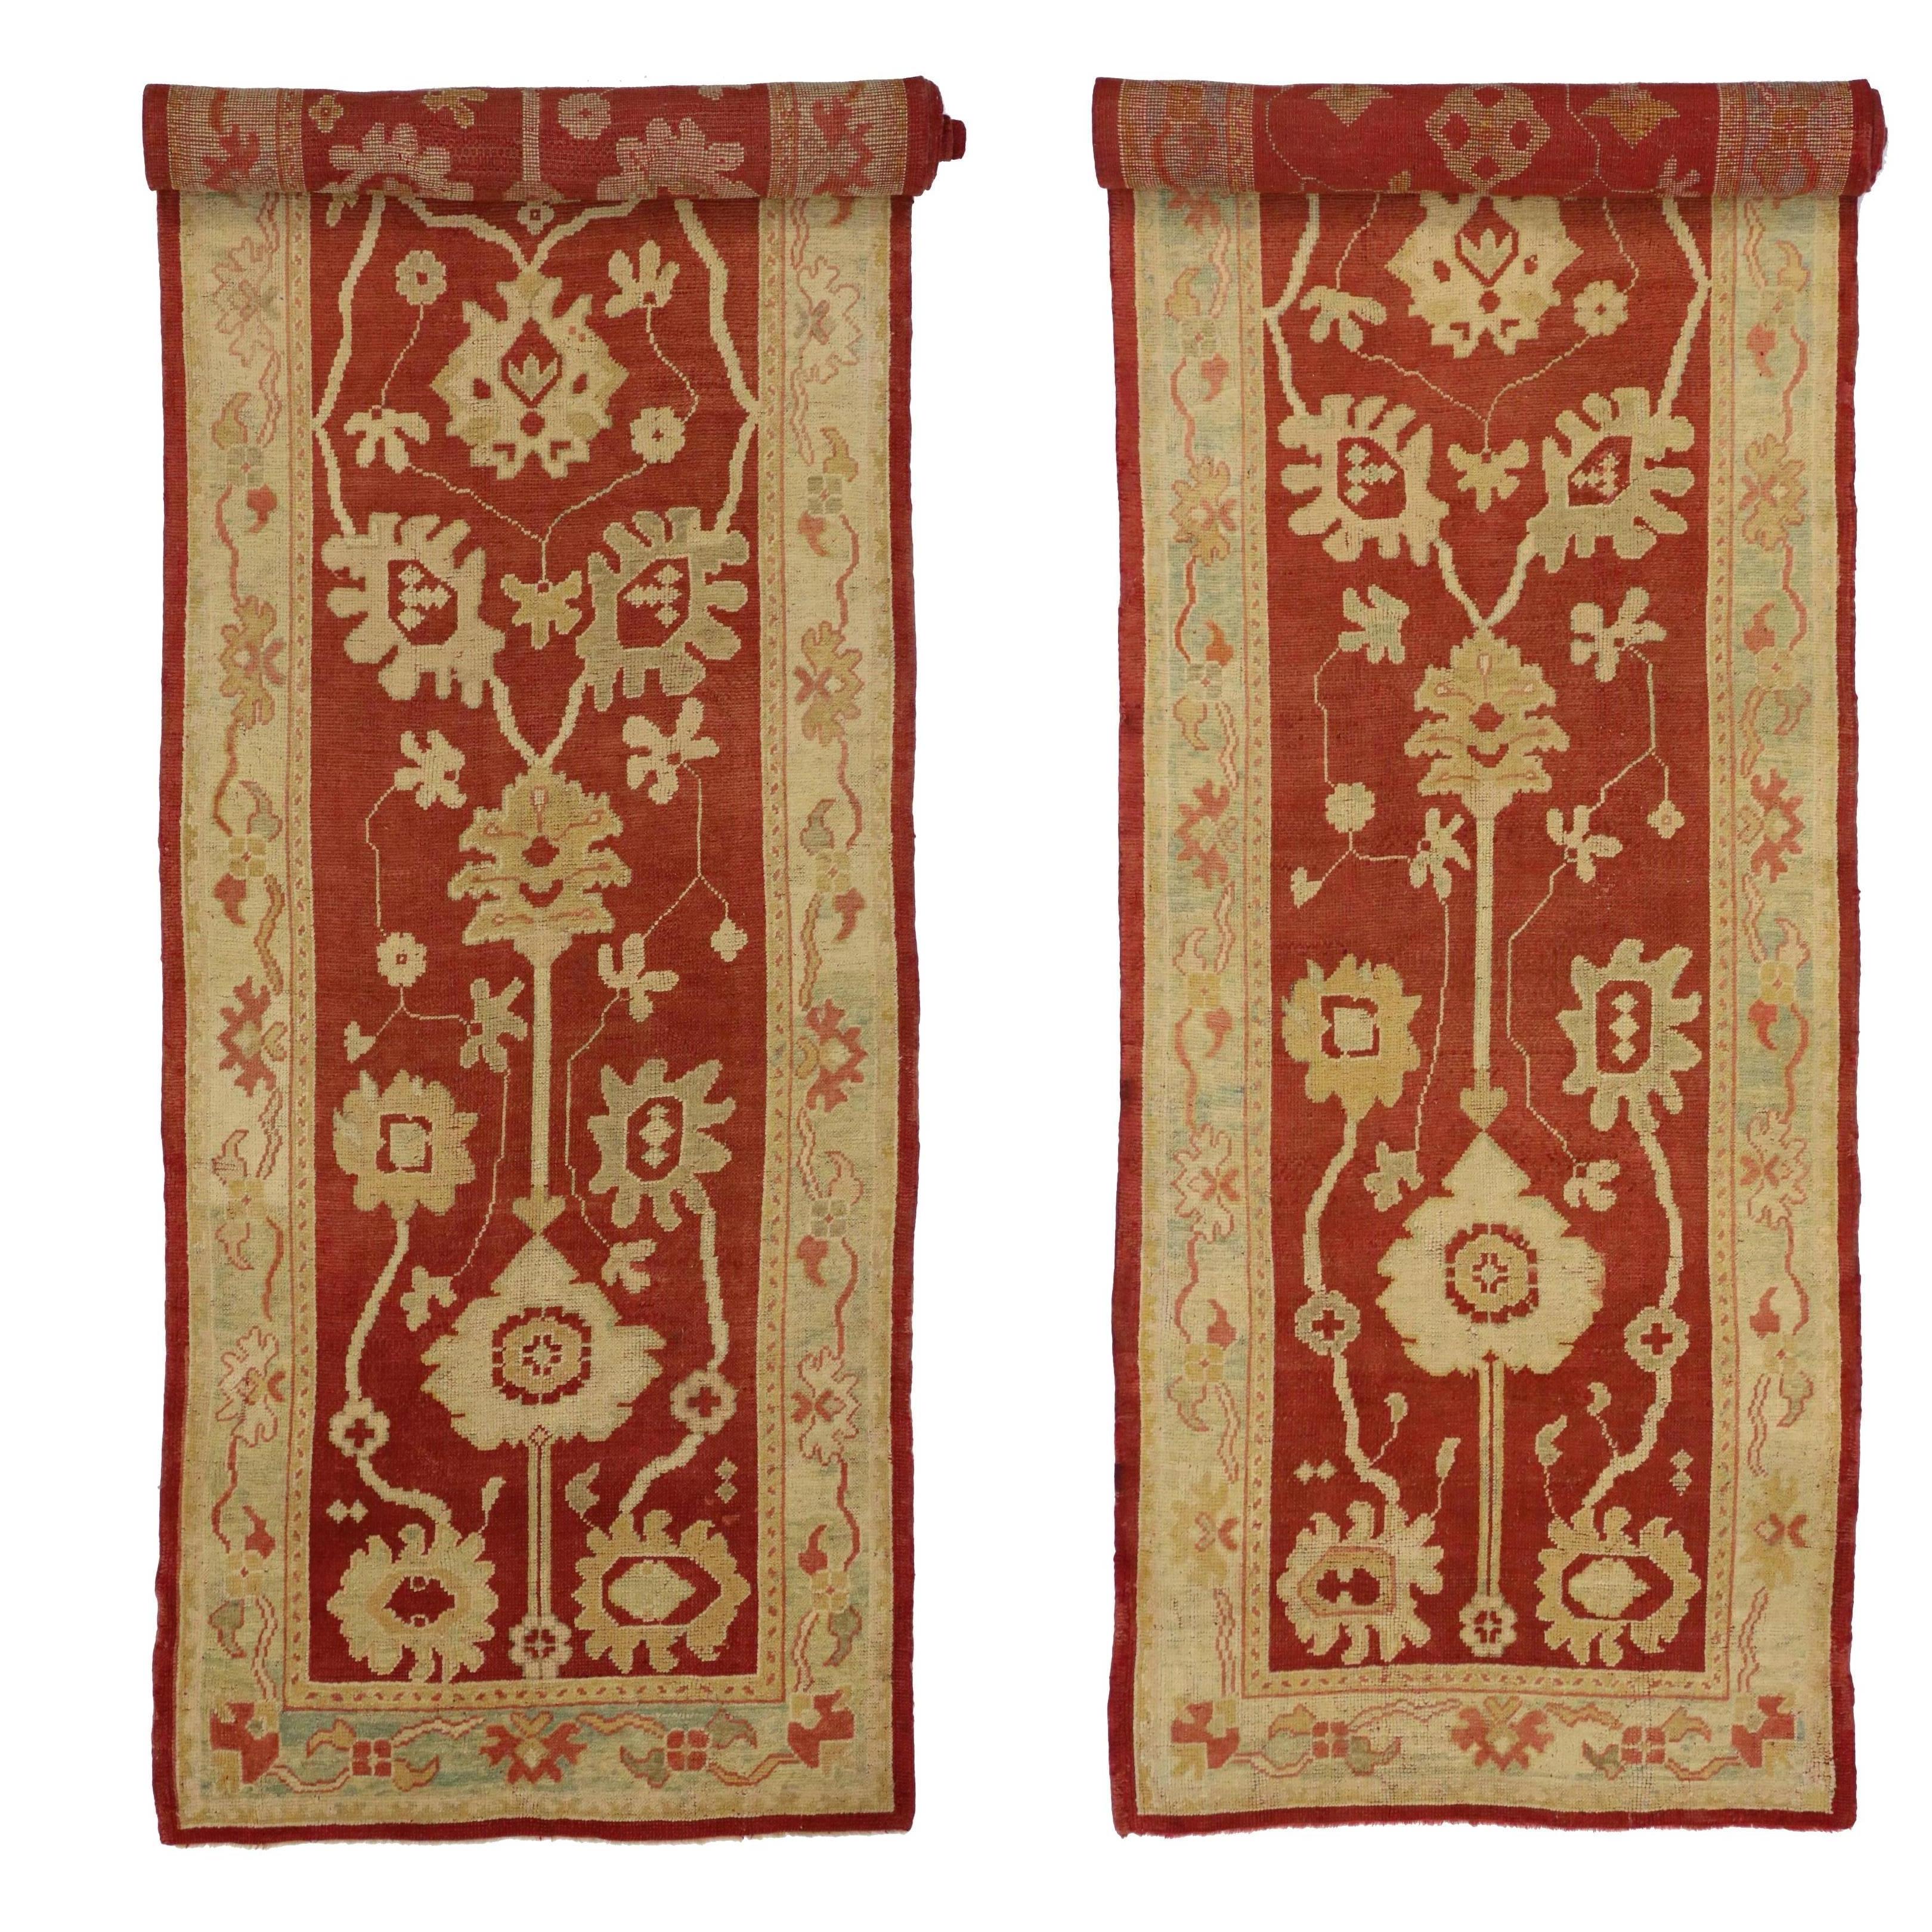 74233-73535 Pair of Matching Antique Turkish Oushak Rug Runners. Exuding both character and an air of timeless elegance, this hand-knotted wool antique Turkish Oushak rug runner effortlessly blends tradition with contemporary appeal. Its design